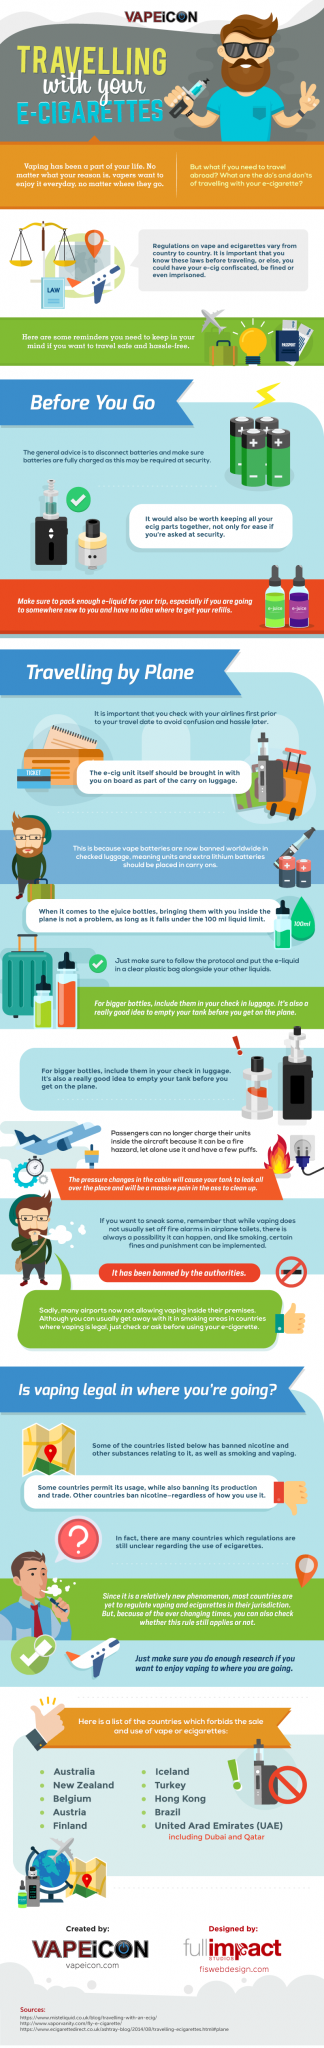 Can You Vape On a Plane - How to Travel by Airplane with ...